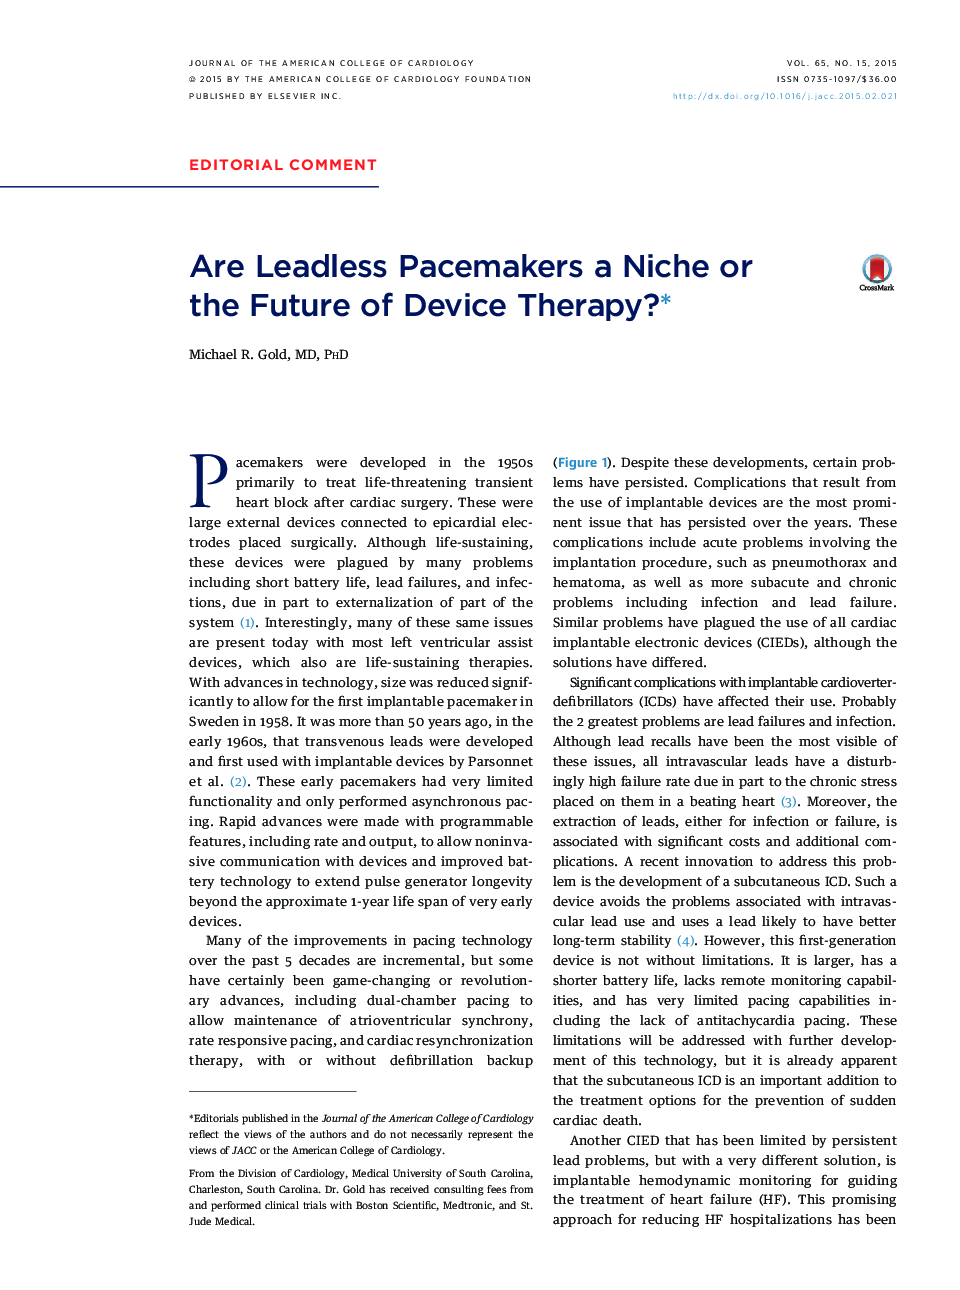 Are Leadless Pacemakers a Niche or theÂ Future of Device Therapy?â